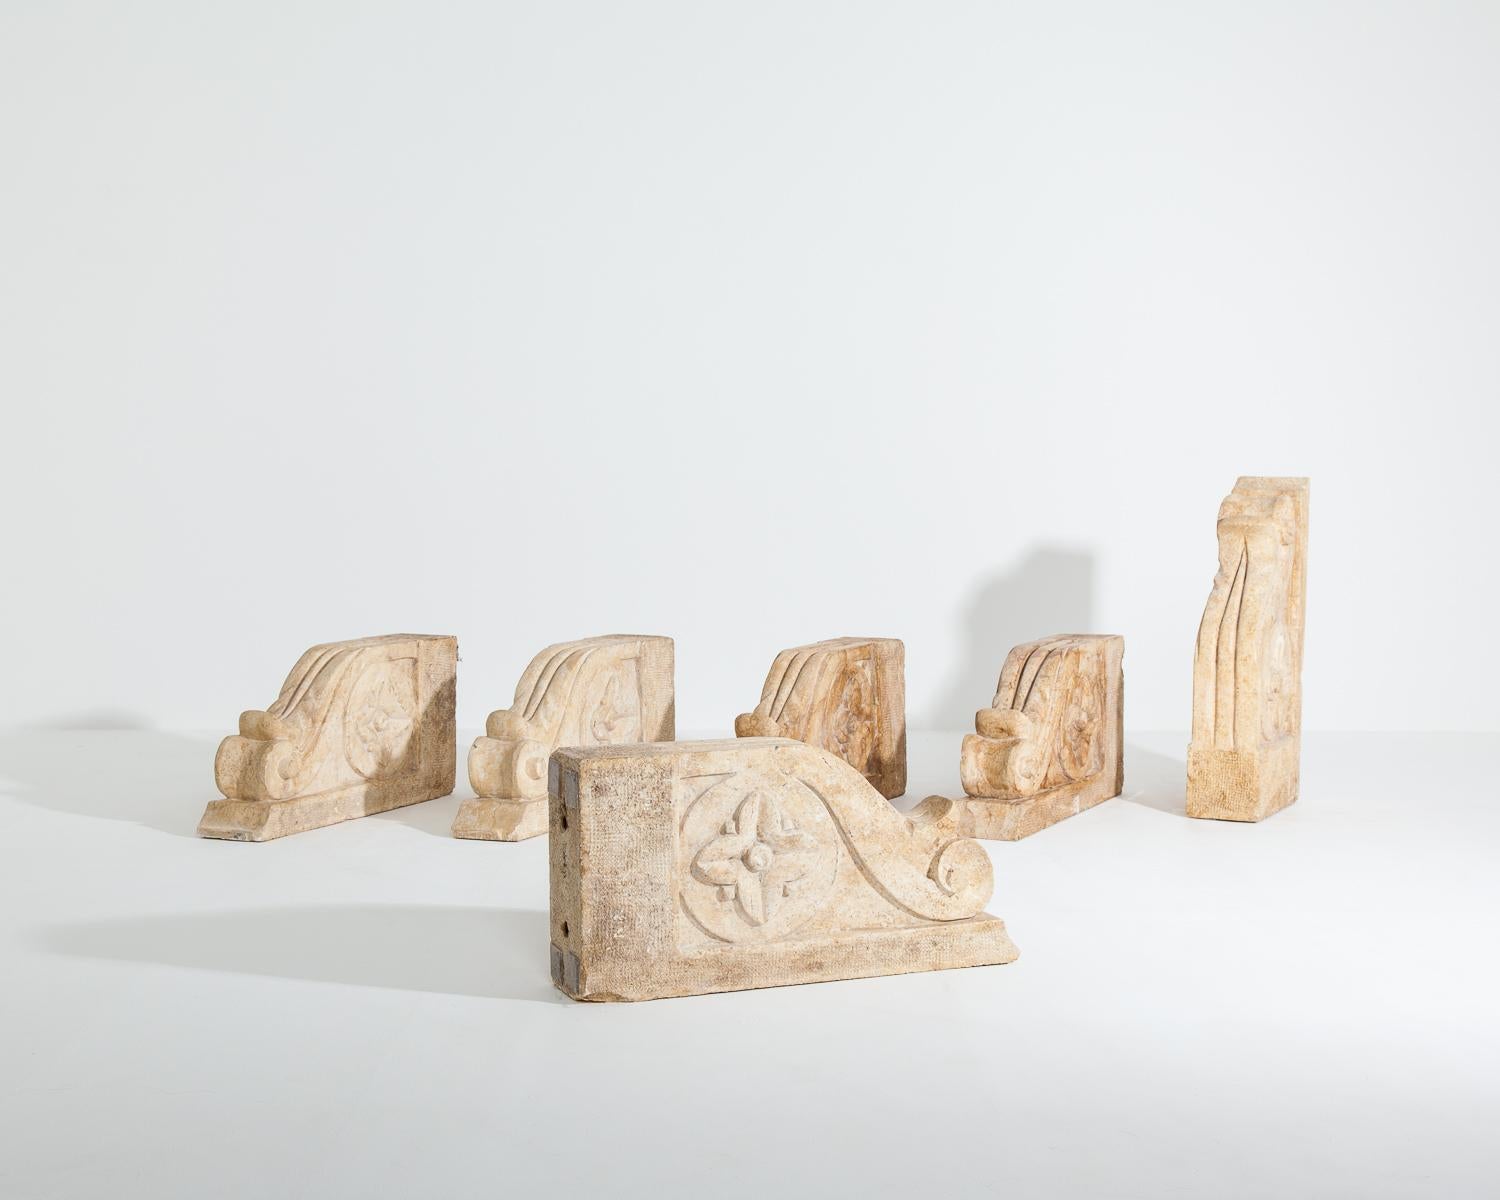 Set of Large 18th-19th Century Stone Corbels, Architectural Antiques 4